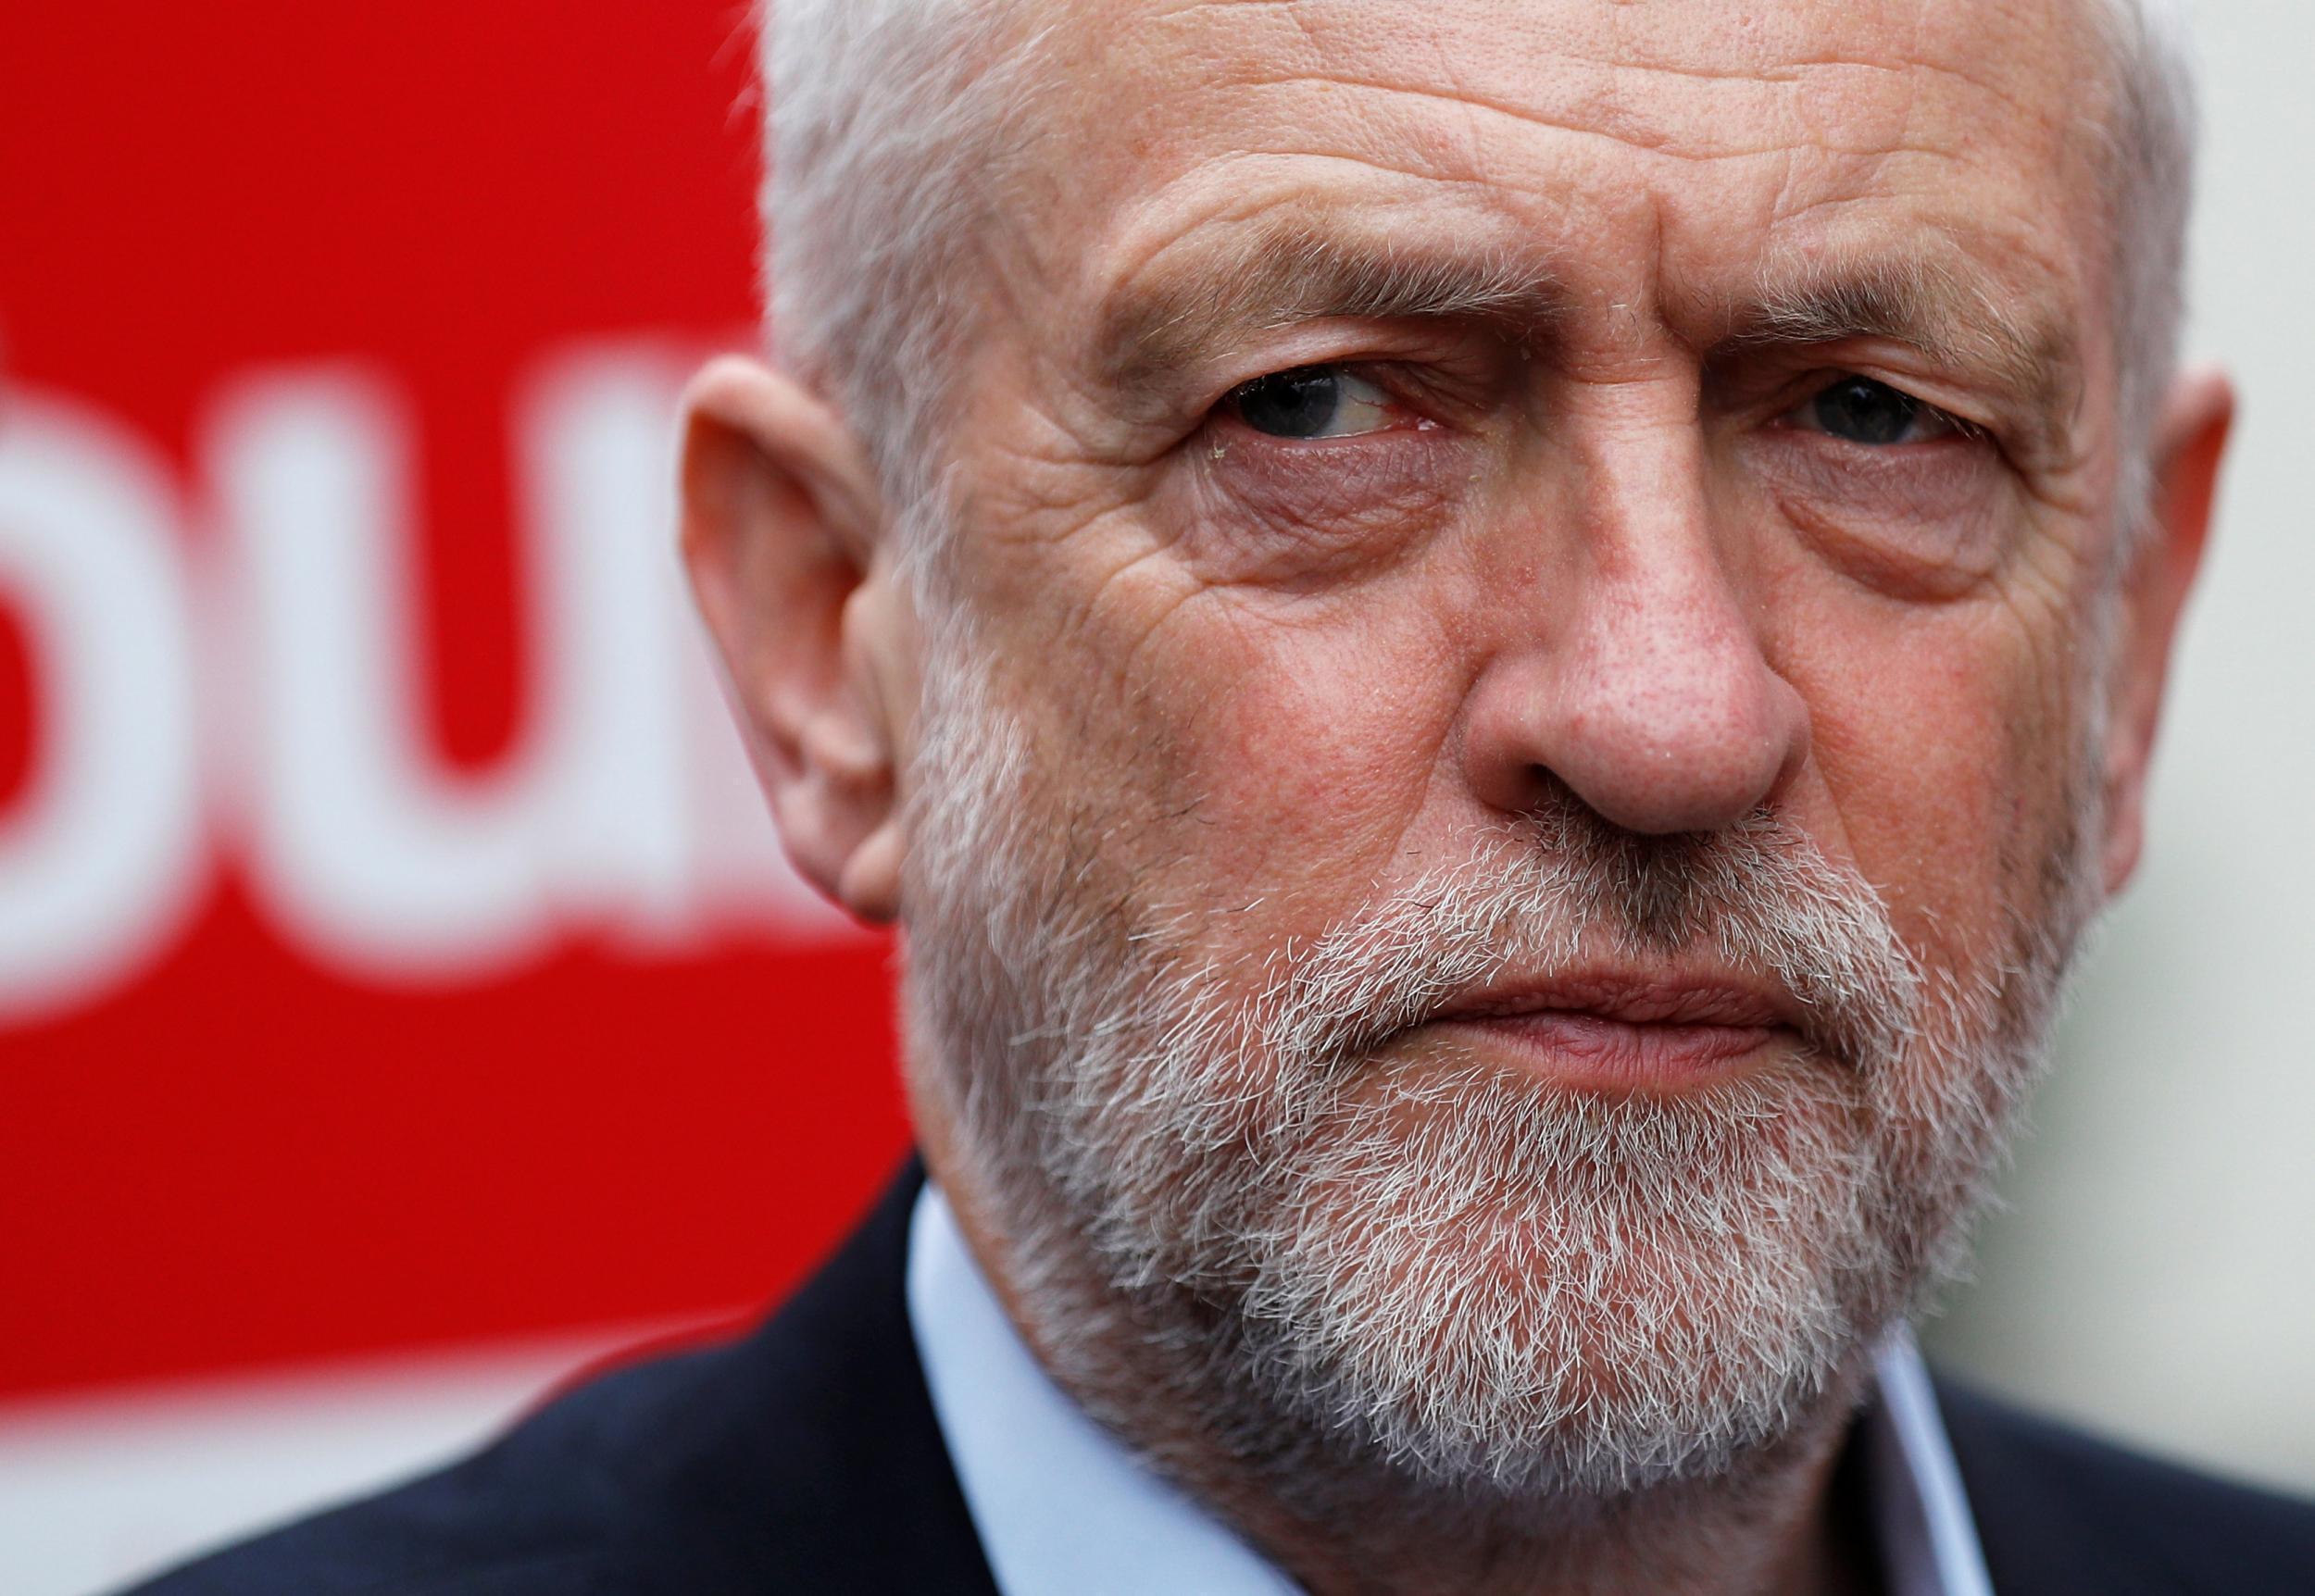 Jeremy Corbyn accused the PM of playing political games over Brexit to gain a partisan advantage